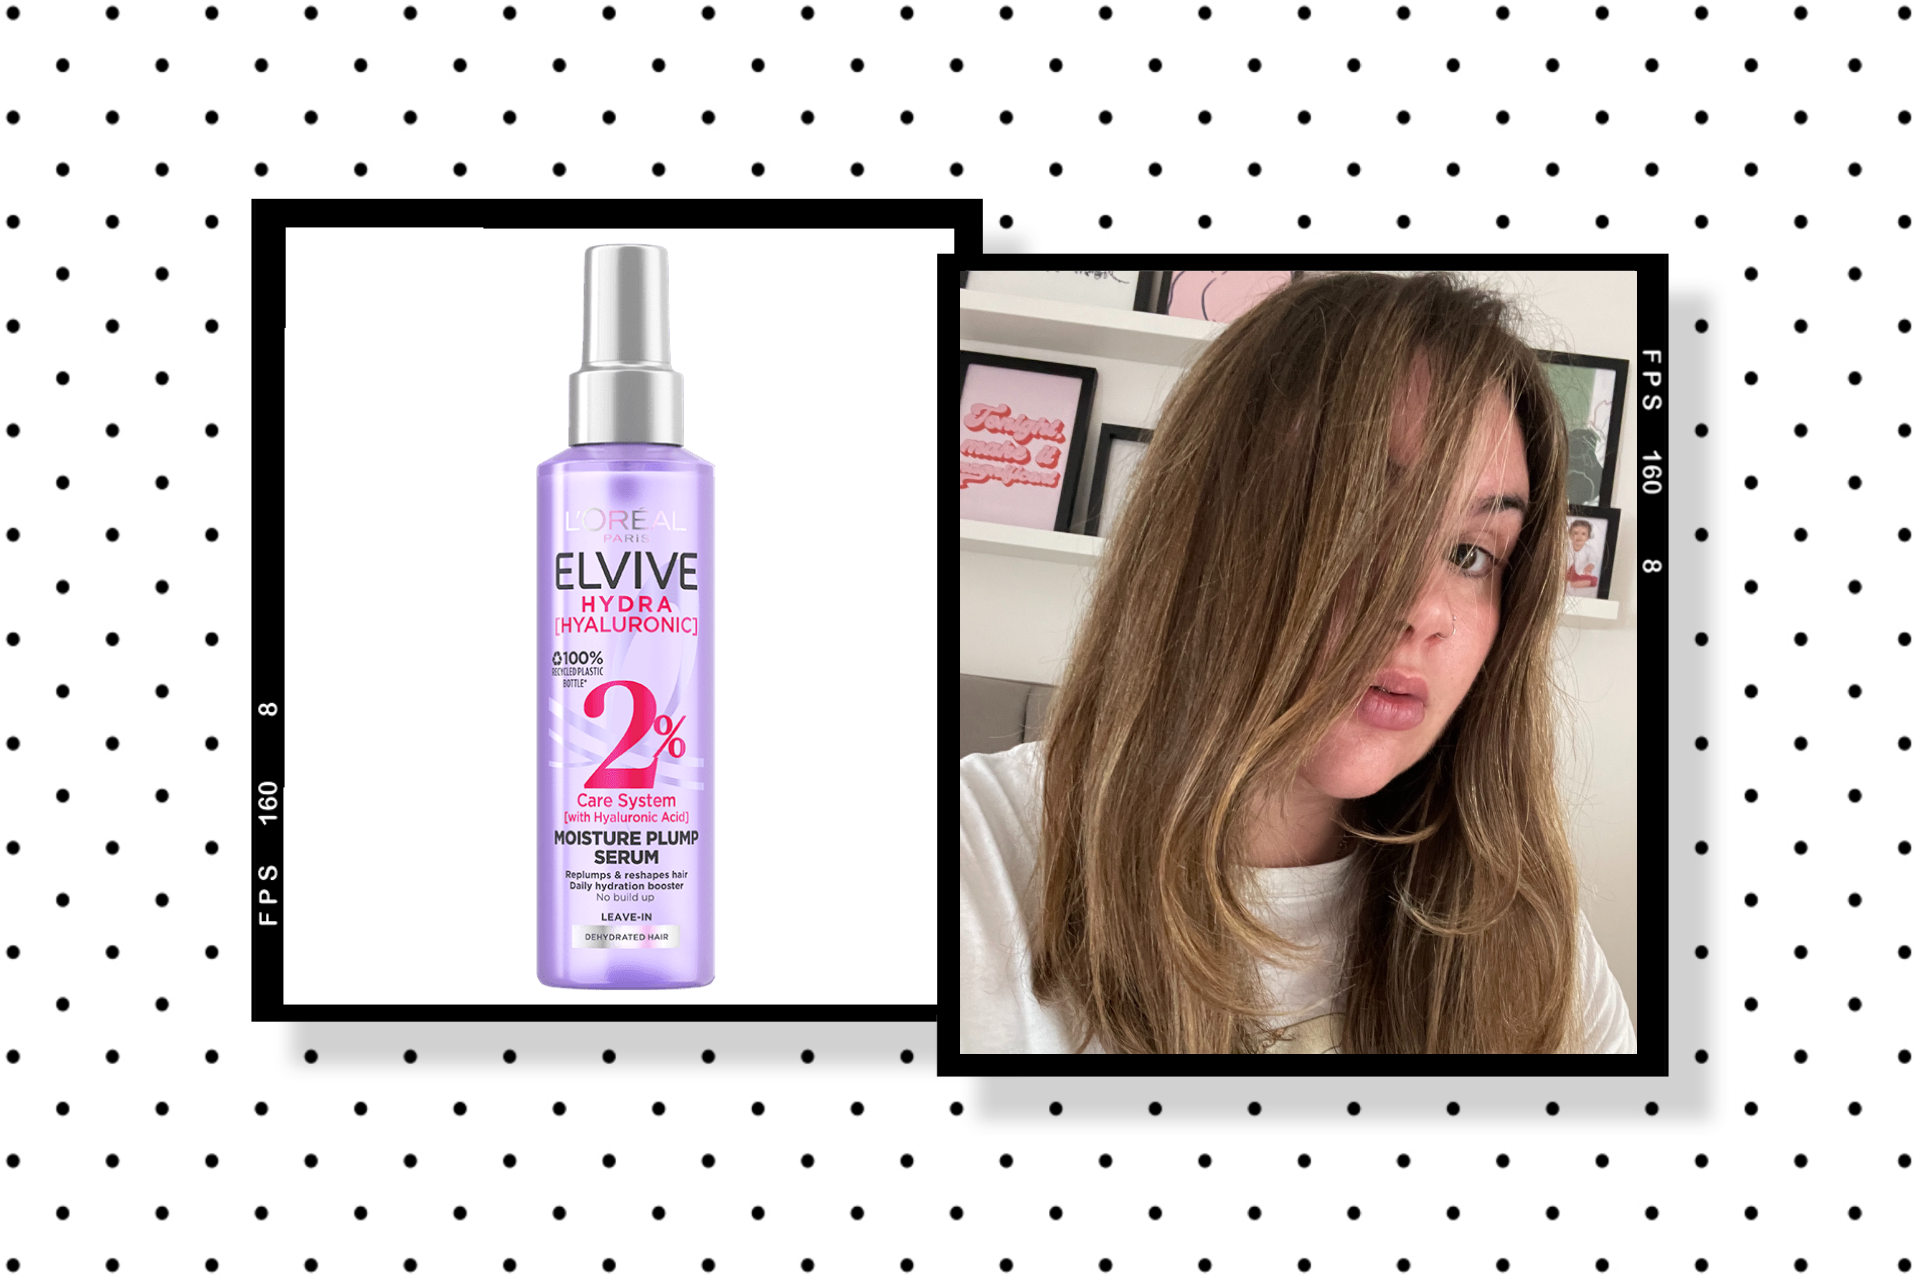 https://images-stylist.s3-eu-west-1.amazonaws.com/app/uploads/2022/10/25121510/loreal-elvive-hydra-hyaluronic-serum-review.png